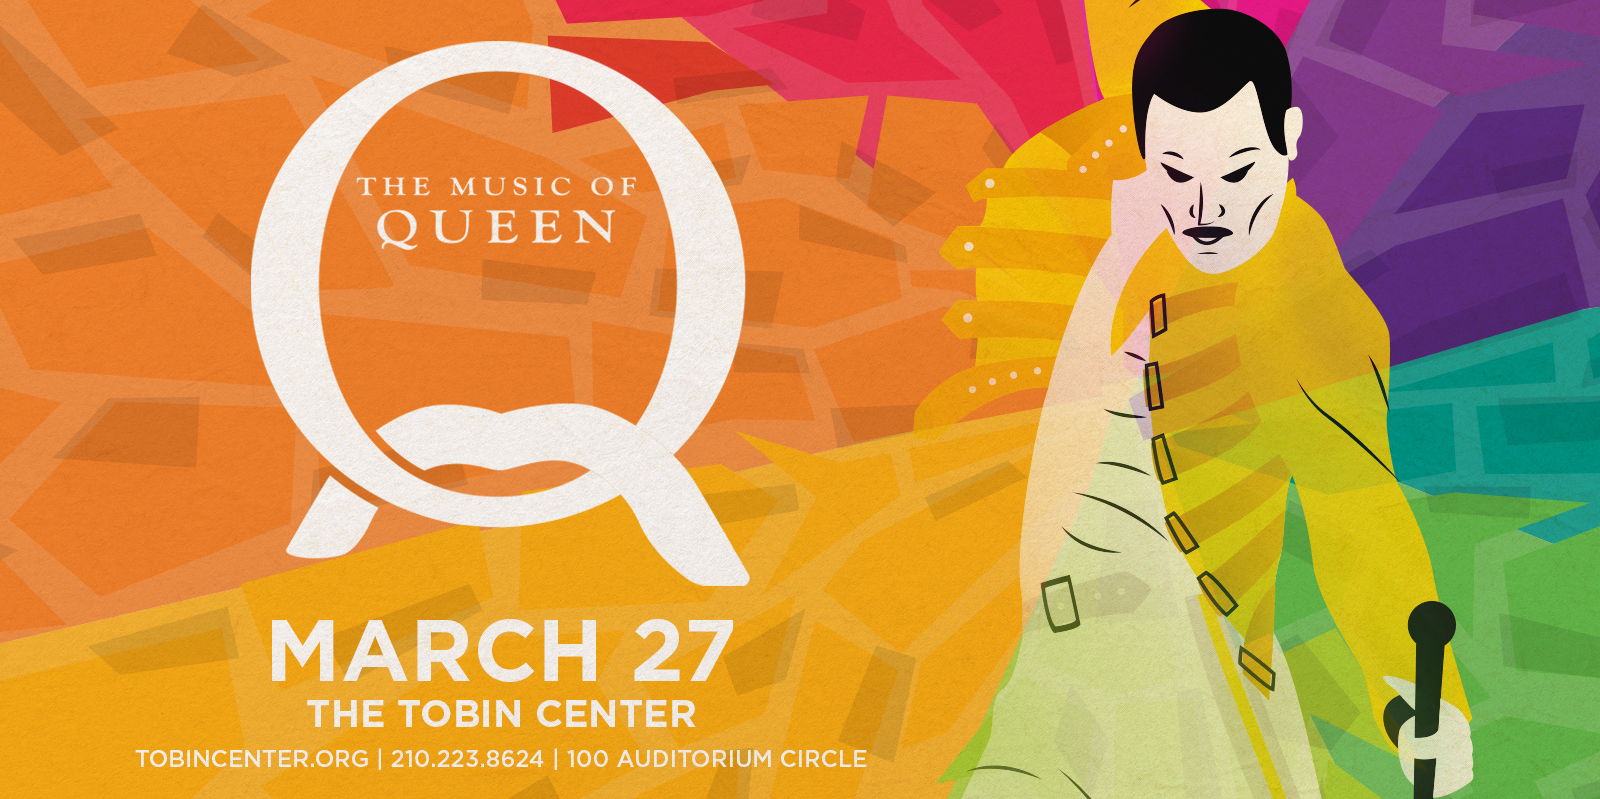 Q: The Music of Queen promotional image